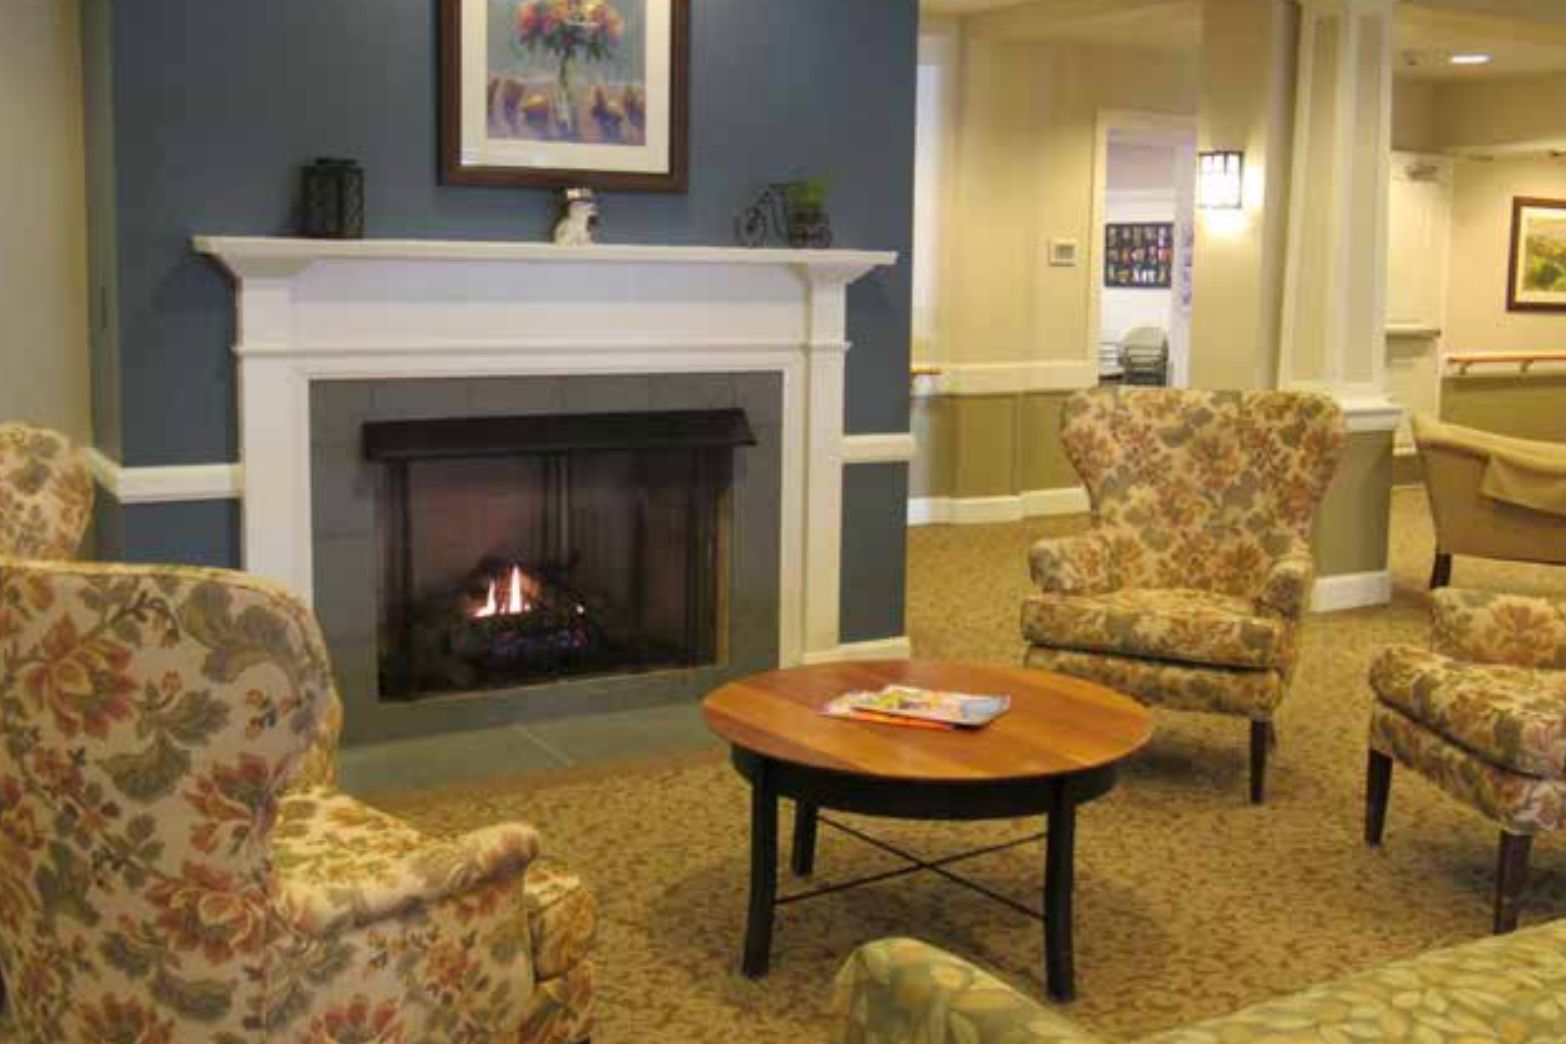 Senior living room at Alexian Village of Elk Grove featuring a fireplace, cozy furniture, and home decor.